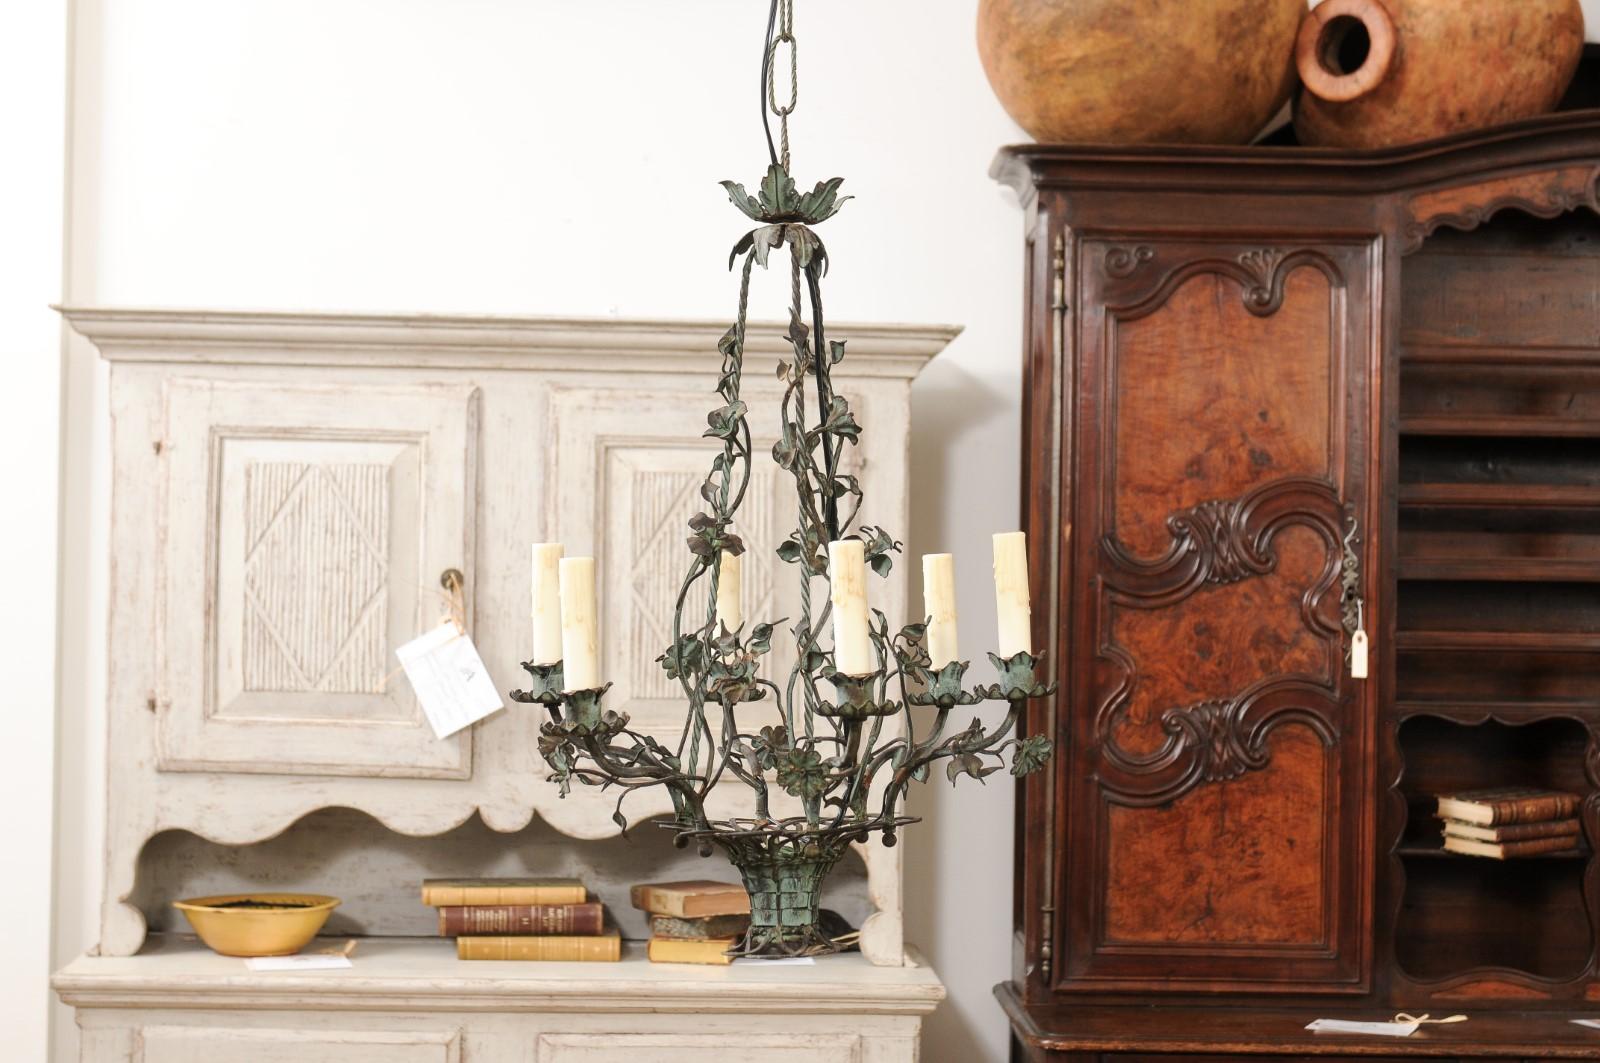 20th Century French Belle Époque 1900s Painted Iron Six-Light Chandelier with Floral Décor